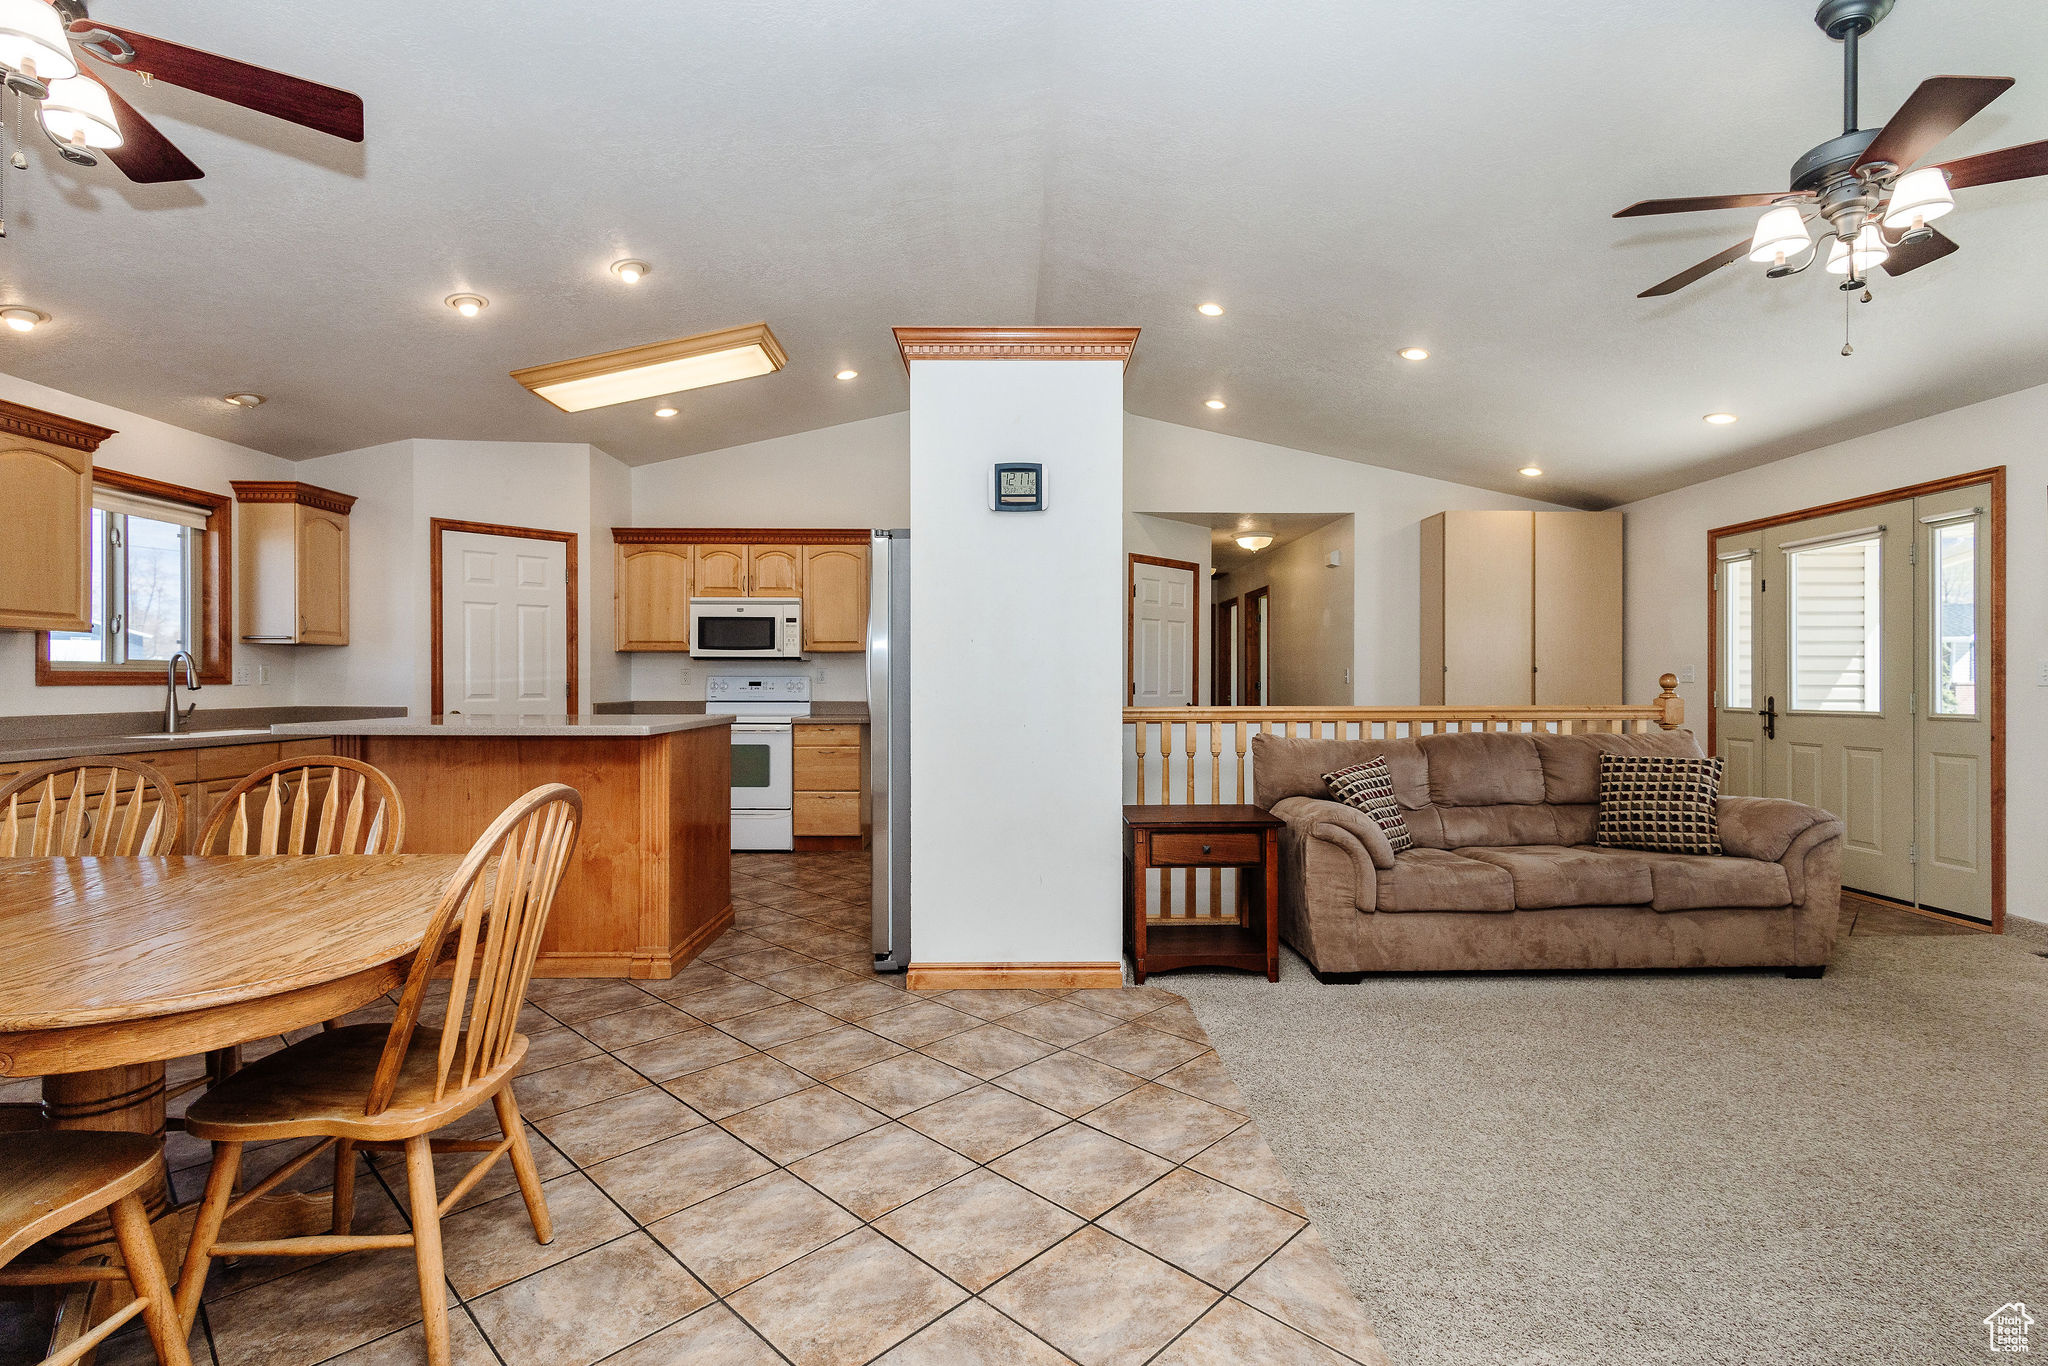 Open concept to semi formal dining, Island bar to kitchen.